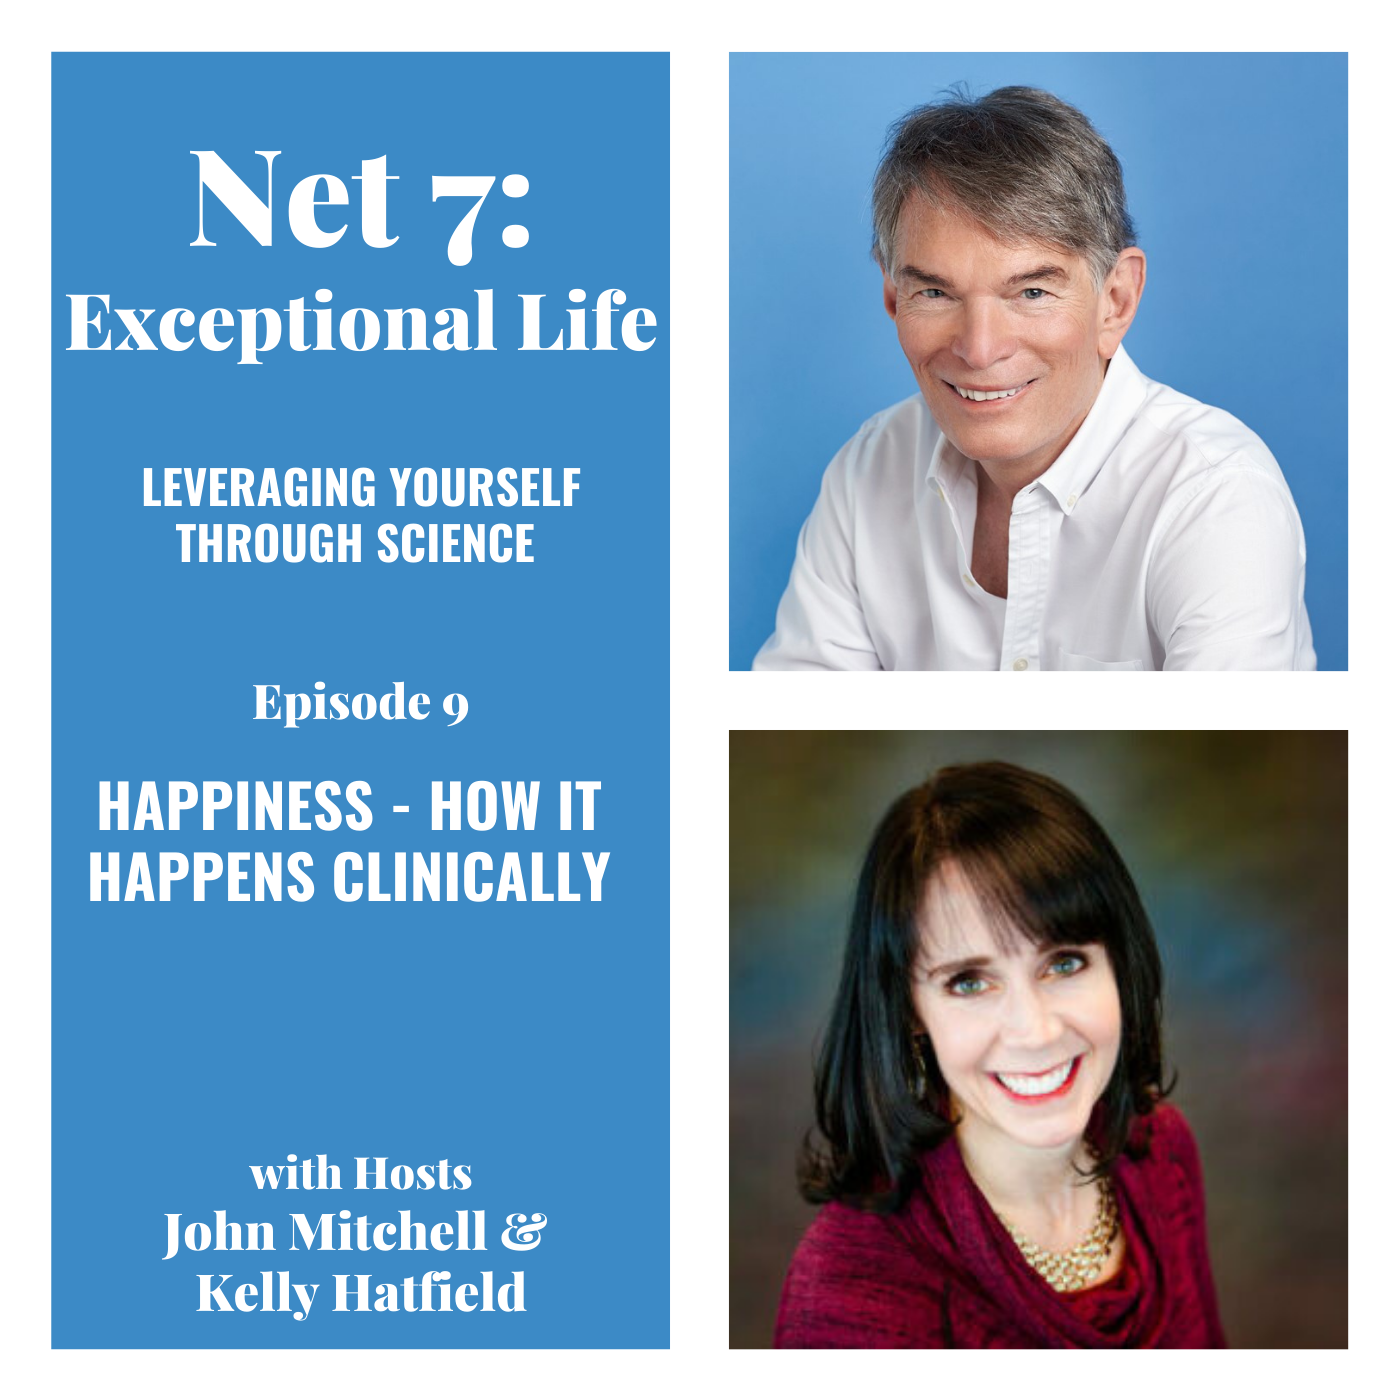 HAPPINESS - How It Happens Clinically